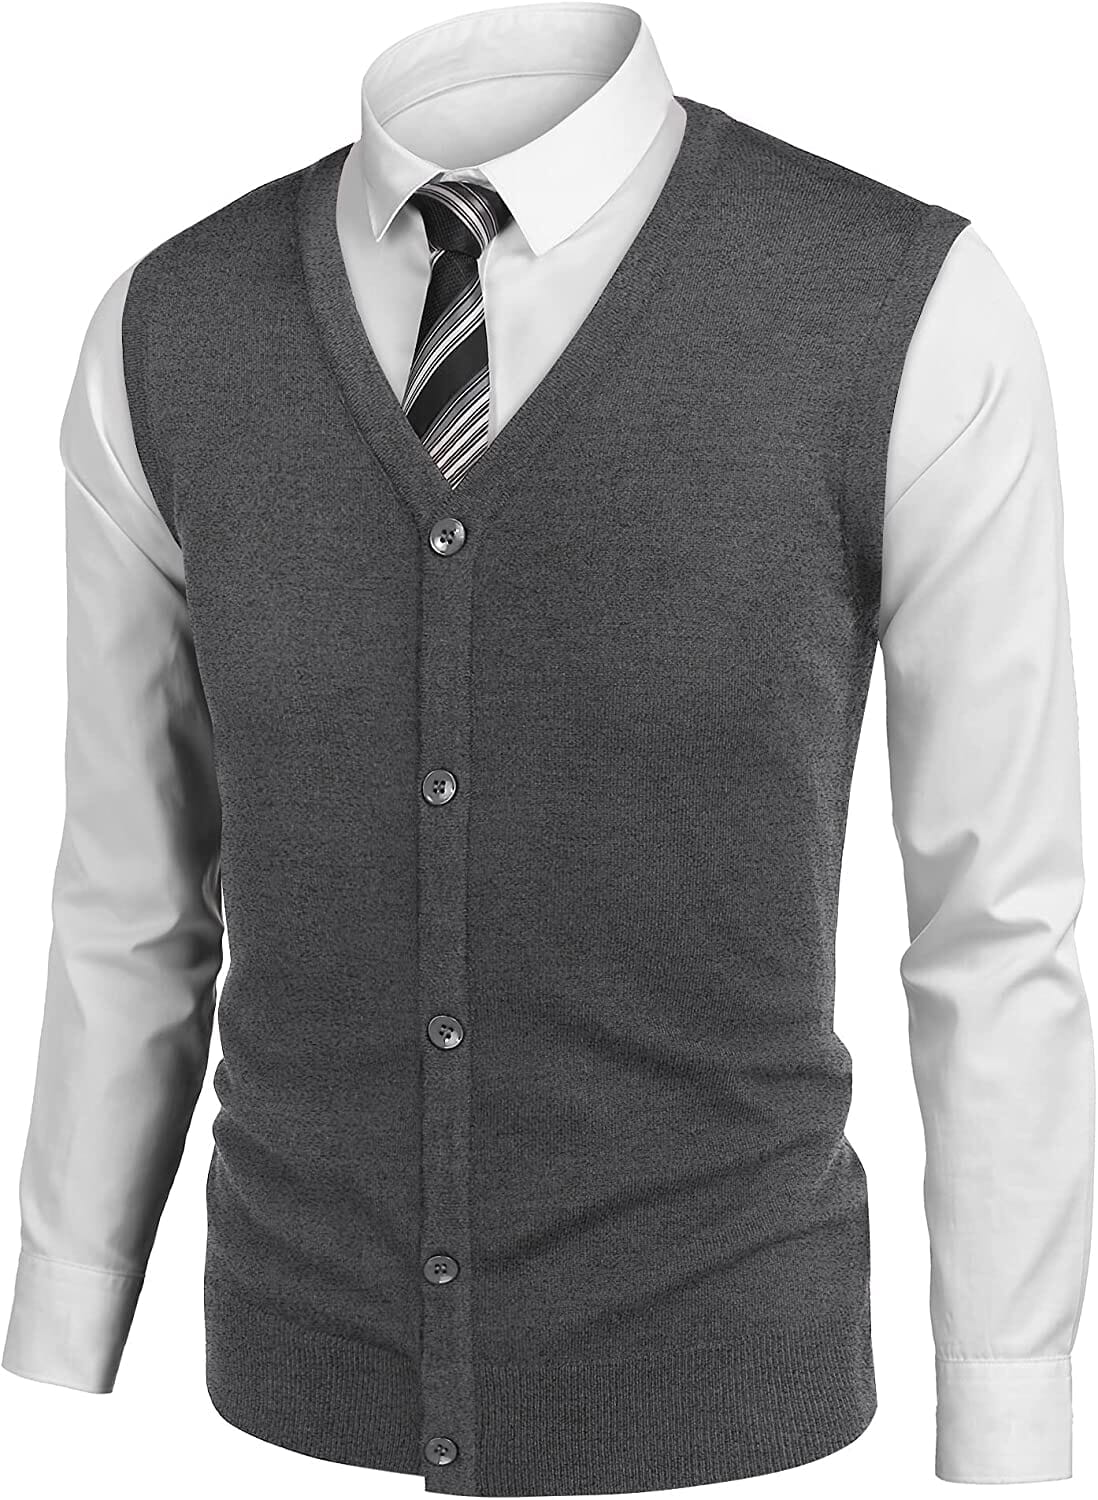 Casual Sleeveless Knitted Button Cardigan Vest (US Only) Vest COOFANDY Store Dark Grey S 